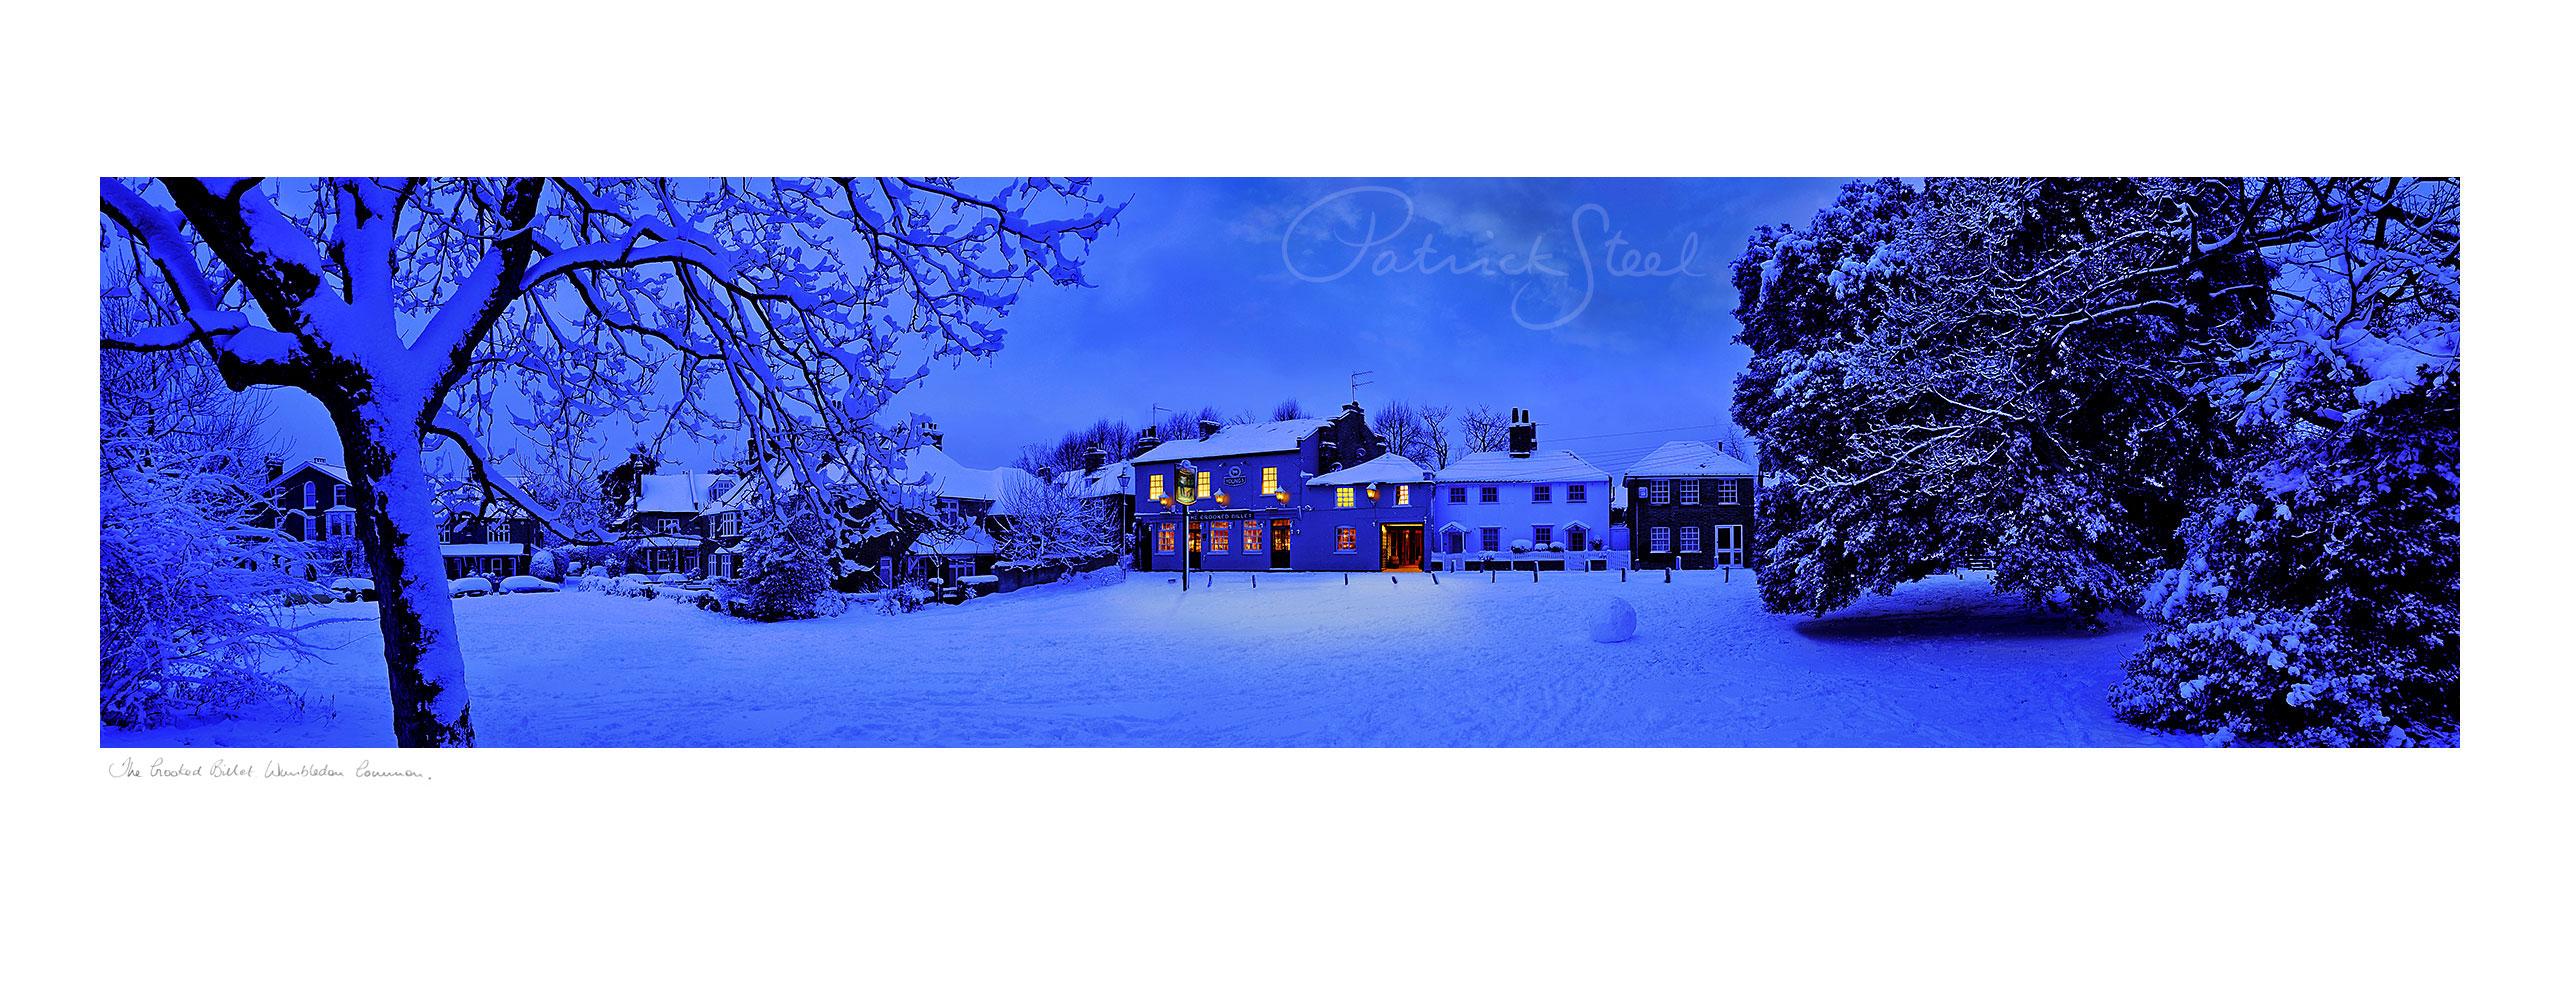 Title: The Crooked Billet in Snow, Wimbledon Common | <a href=